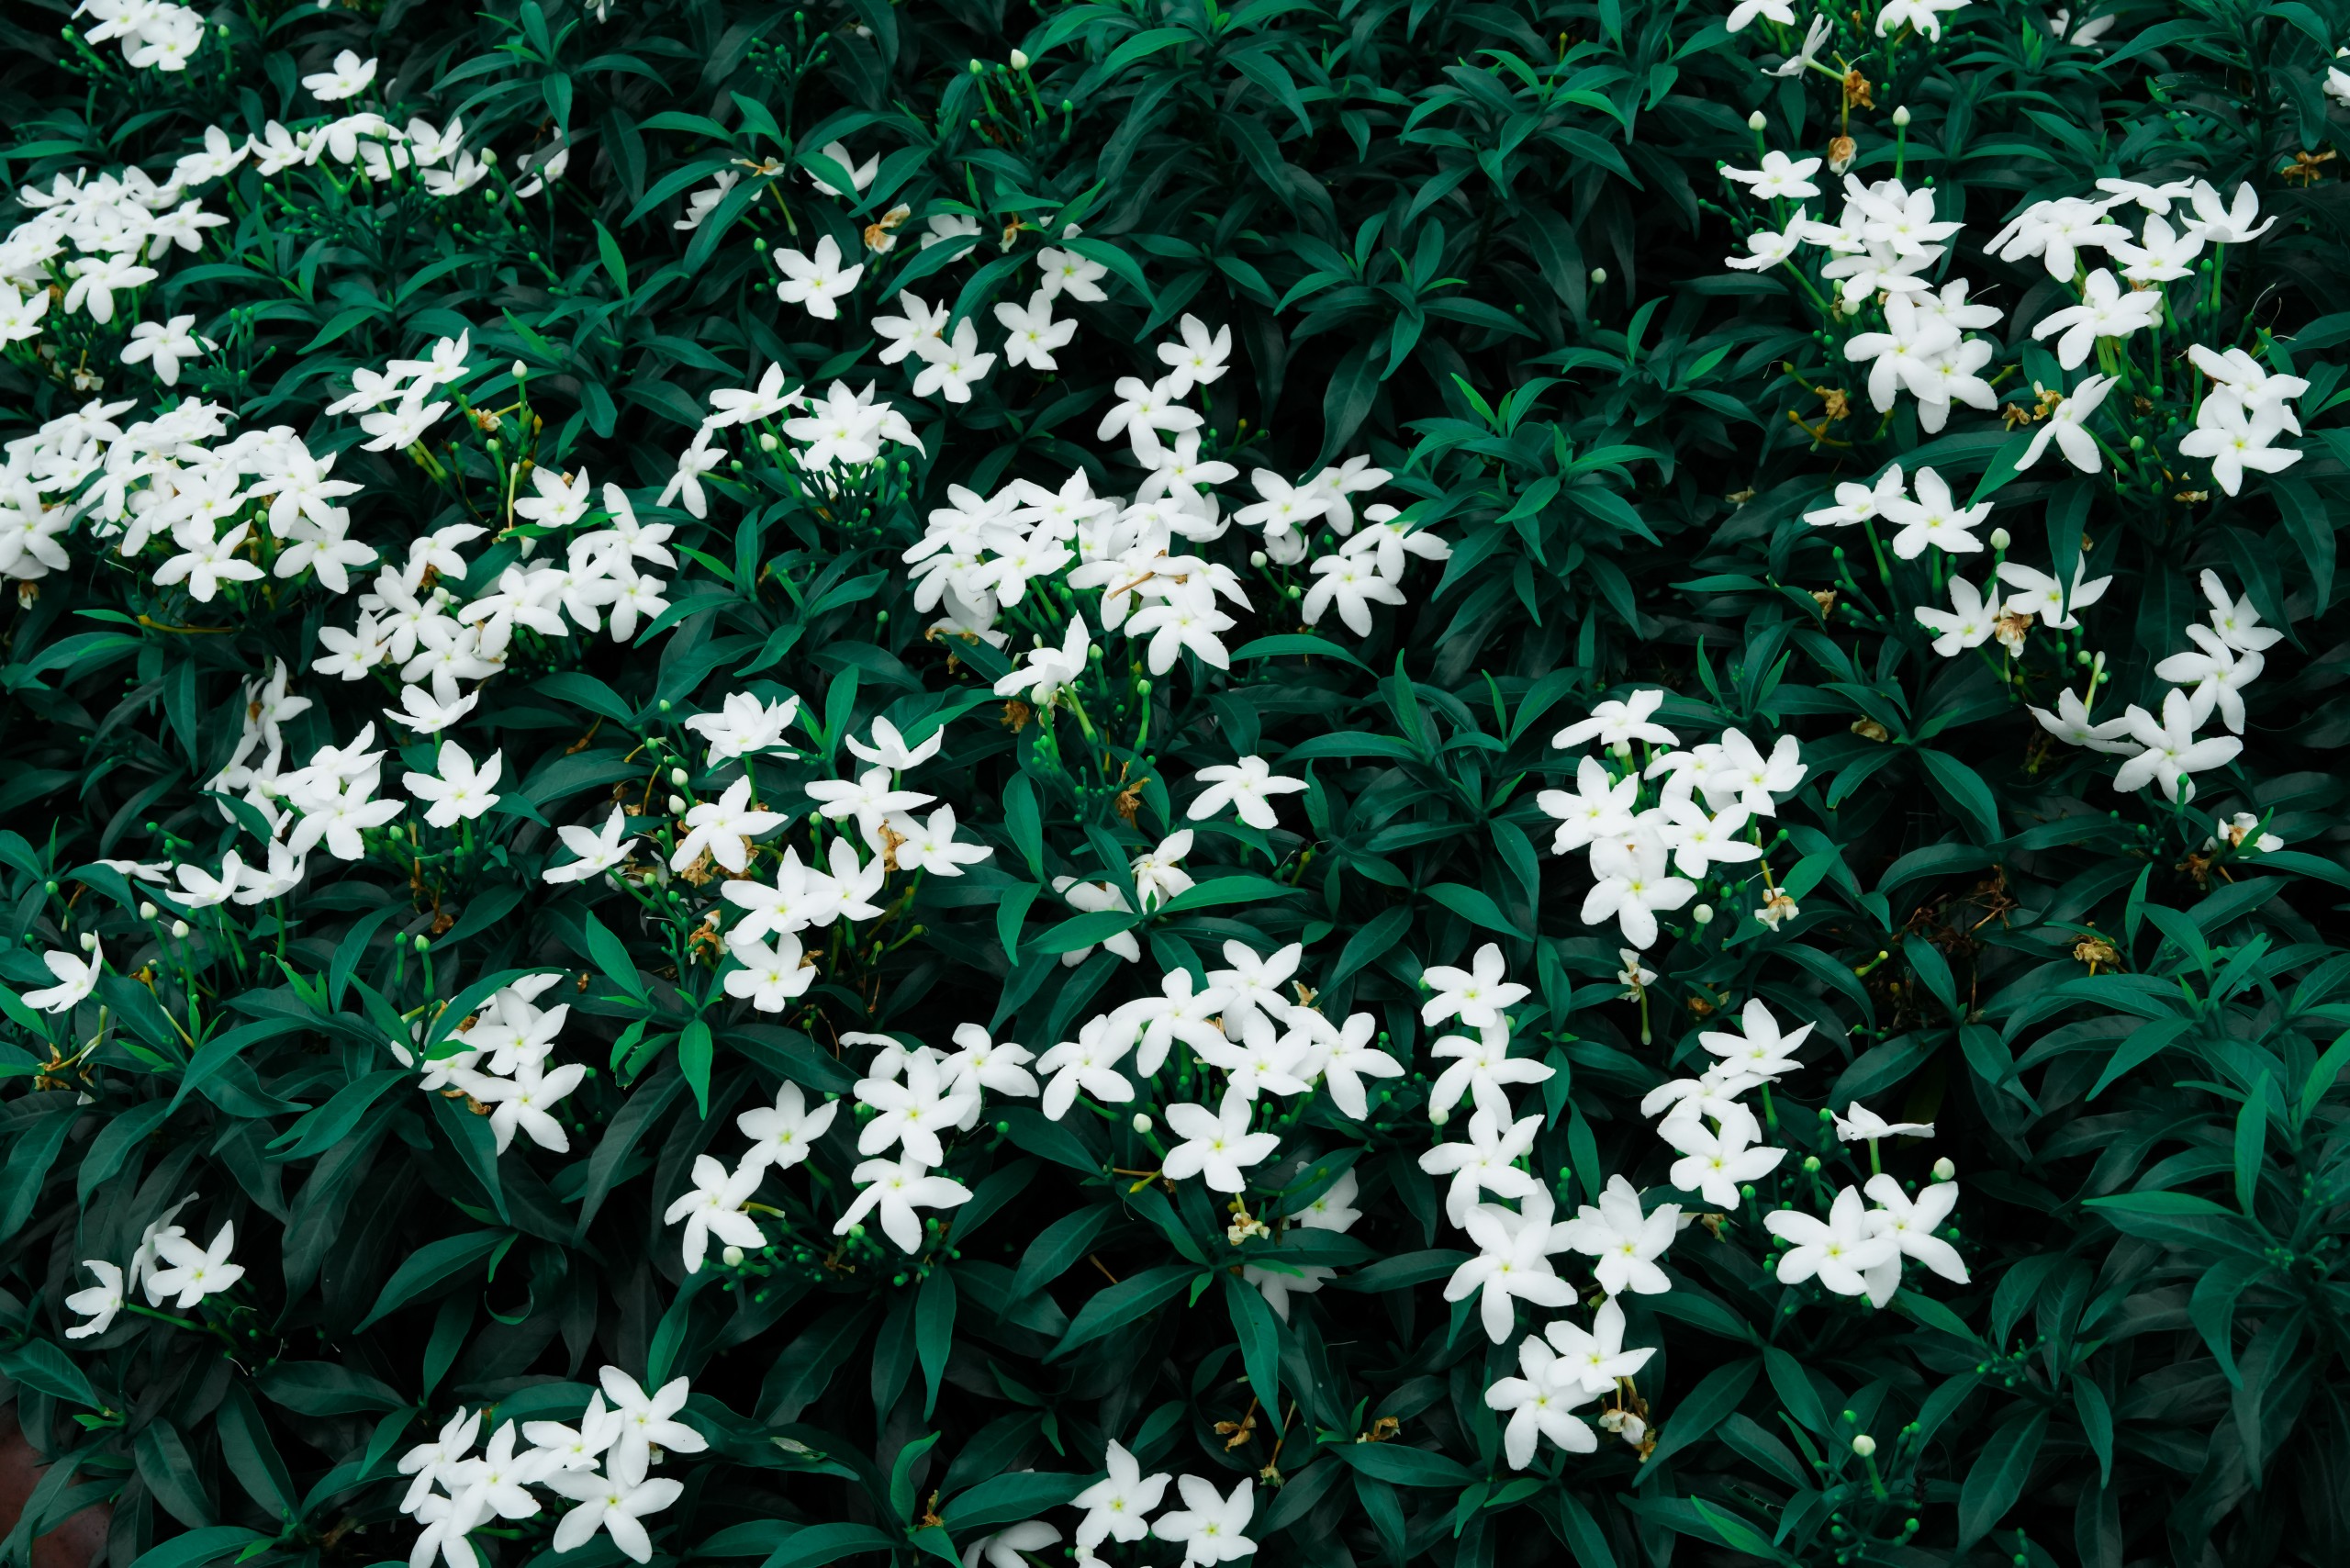 Group of white flowers